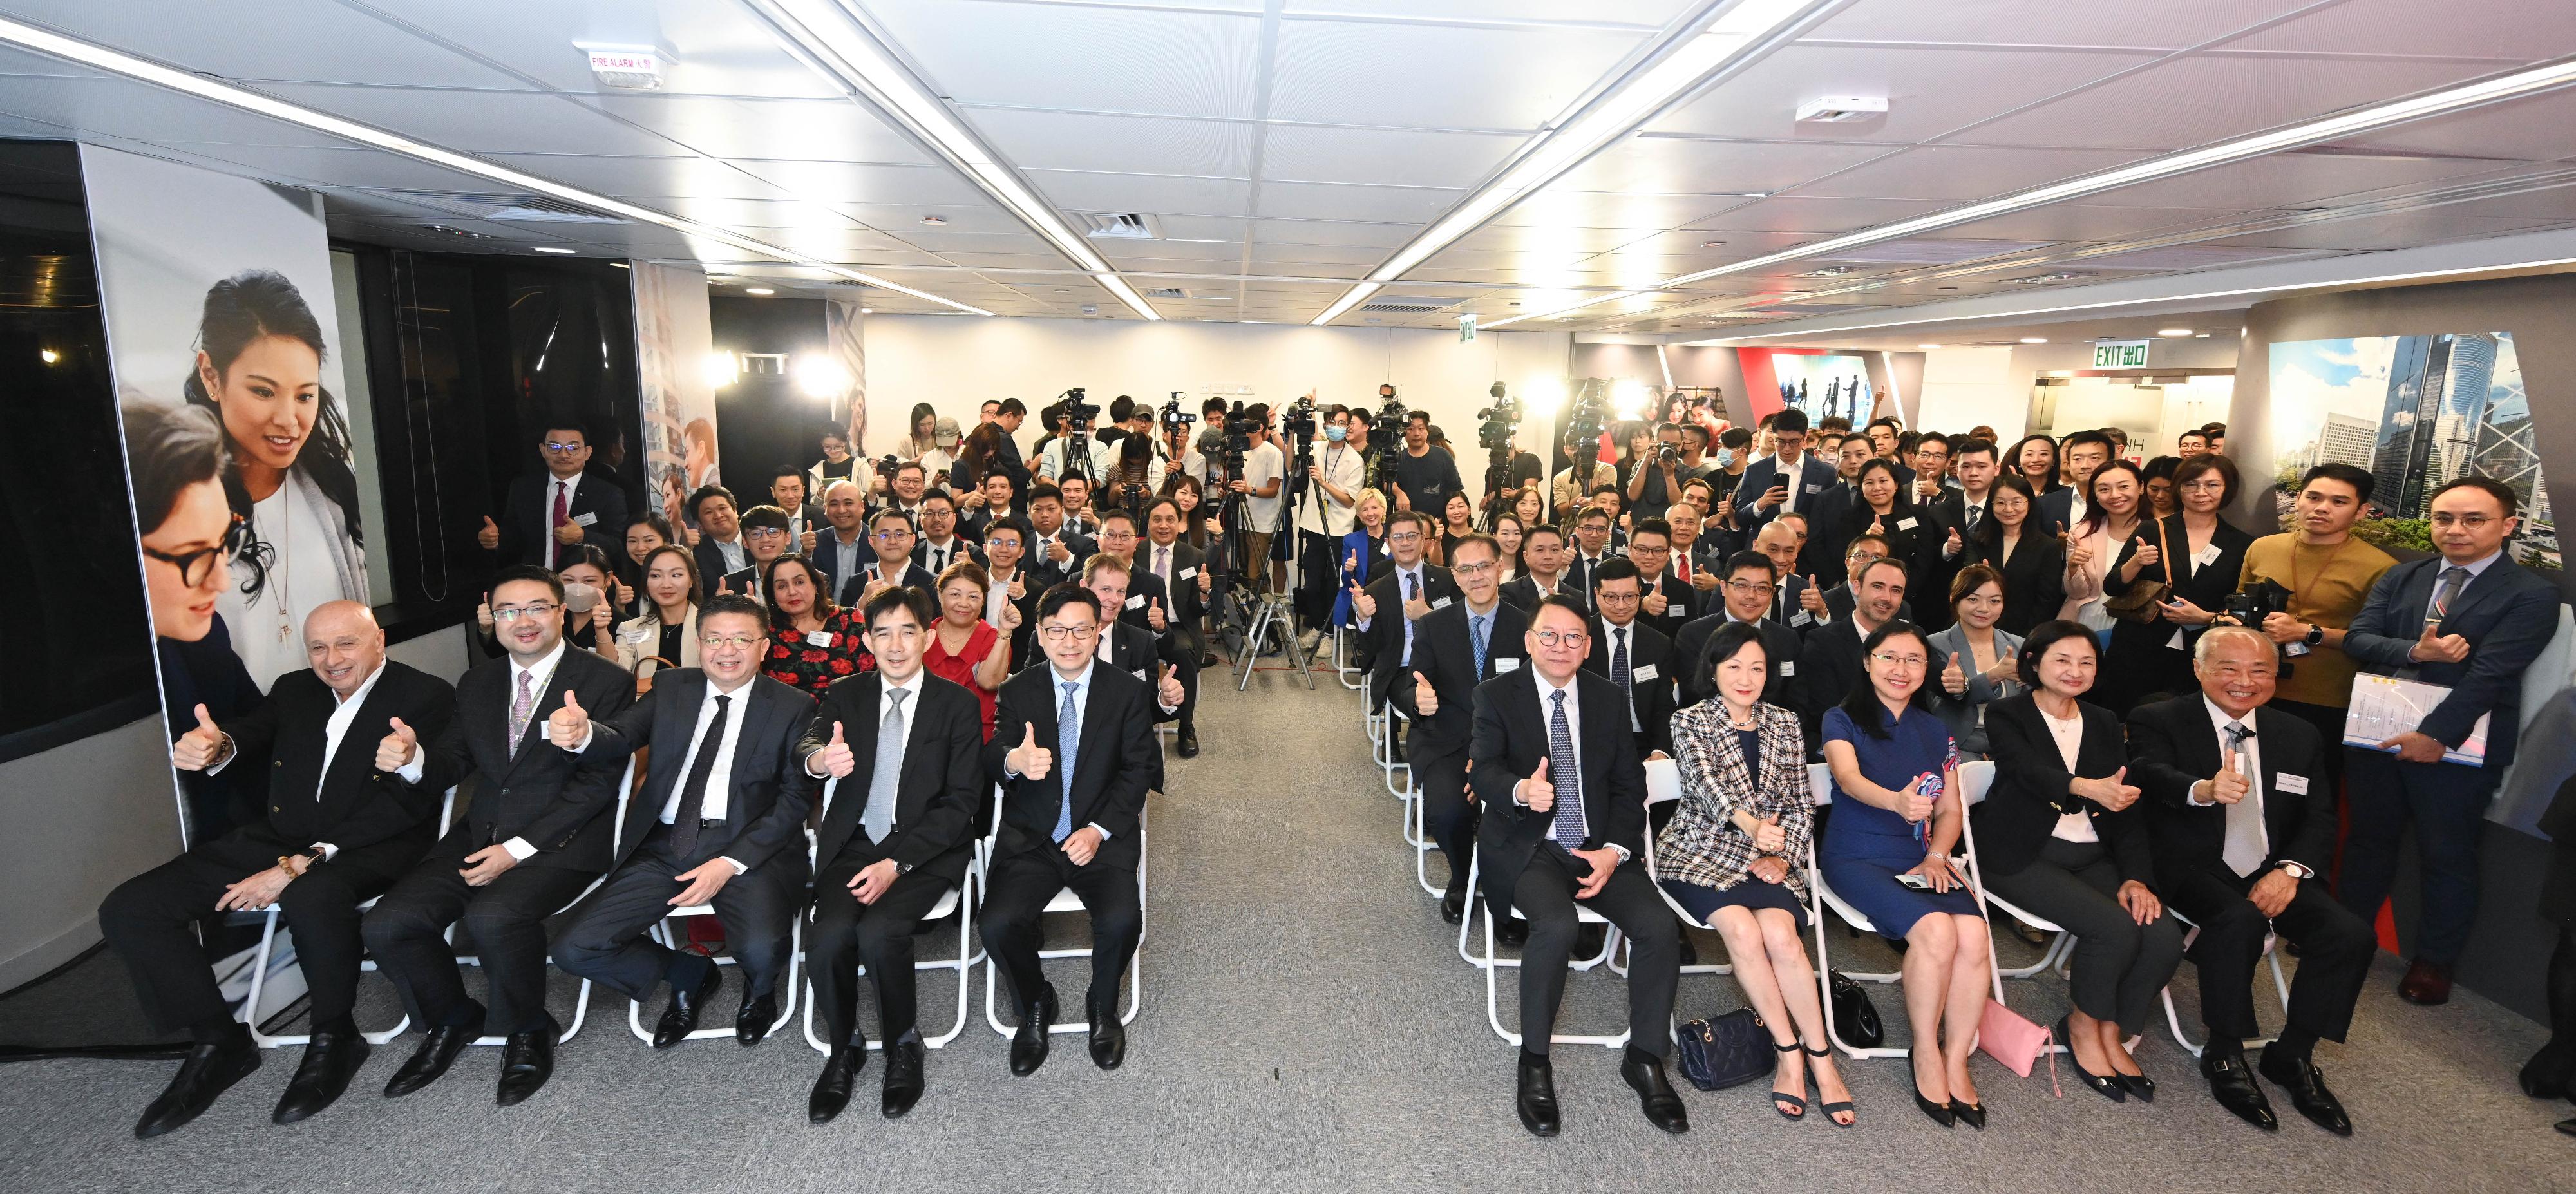 The Chief Secretary for Administration, Mr Chan Kwok-ki, today (October 30) officiated at the Hong Kong Talent Engage (HKTE) Office Opening Ceremony. Photo shows (first row, from third left) the Director of HKTE, Mr Anthony Lau; the Director-General of the Office for Attracting Strategic Enterprises, Mr Philip Yung; the Secretary for Labour and Welfare, Mr Chris Sun; Mr Chan; the Convenor of the Non-official Members of the Executive Council, Mrs Regina Ip; the Permanent Secretary for Labour and Welfare, Ms Alice Lau; the Deputy Secretary for Labour and Welfare (Manpower), Ms Angelina Kwan, with Legislative Council members and representatives of advisory bodies, the business sector, professional associations, non-governmental organisations and HKTE's designated partners attending the opening ceremony.